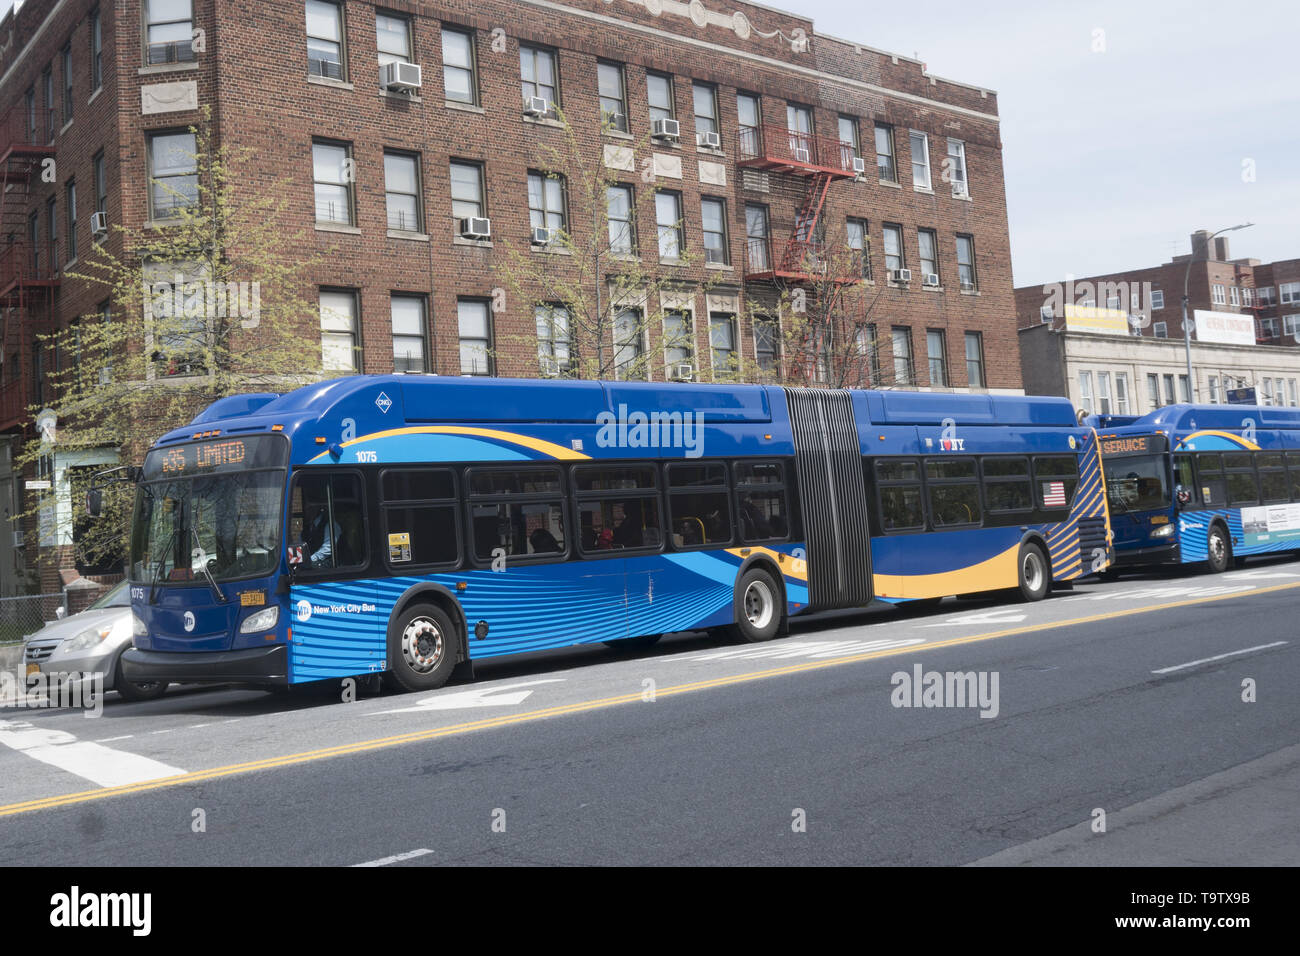 One of the new electric buses on the streets of New York City. Church ...